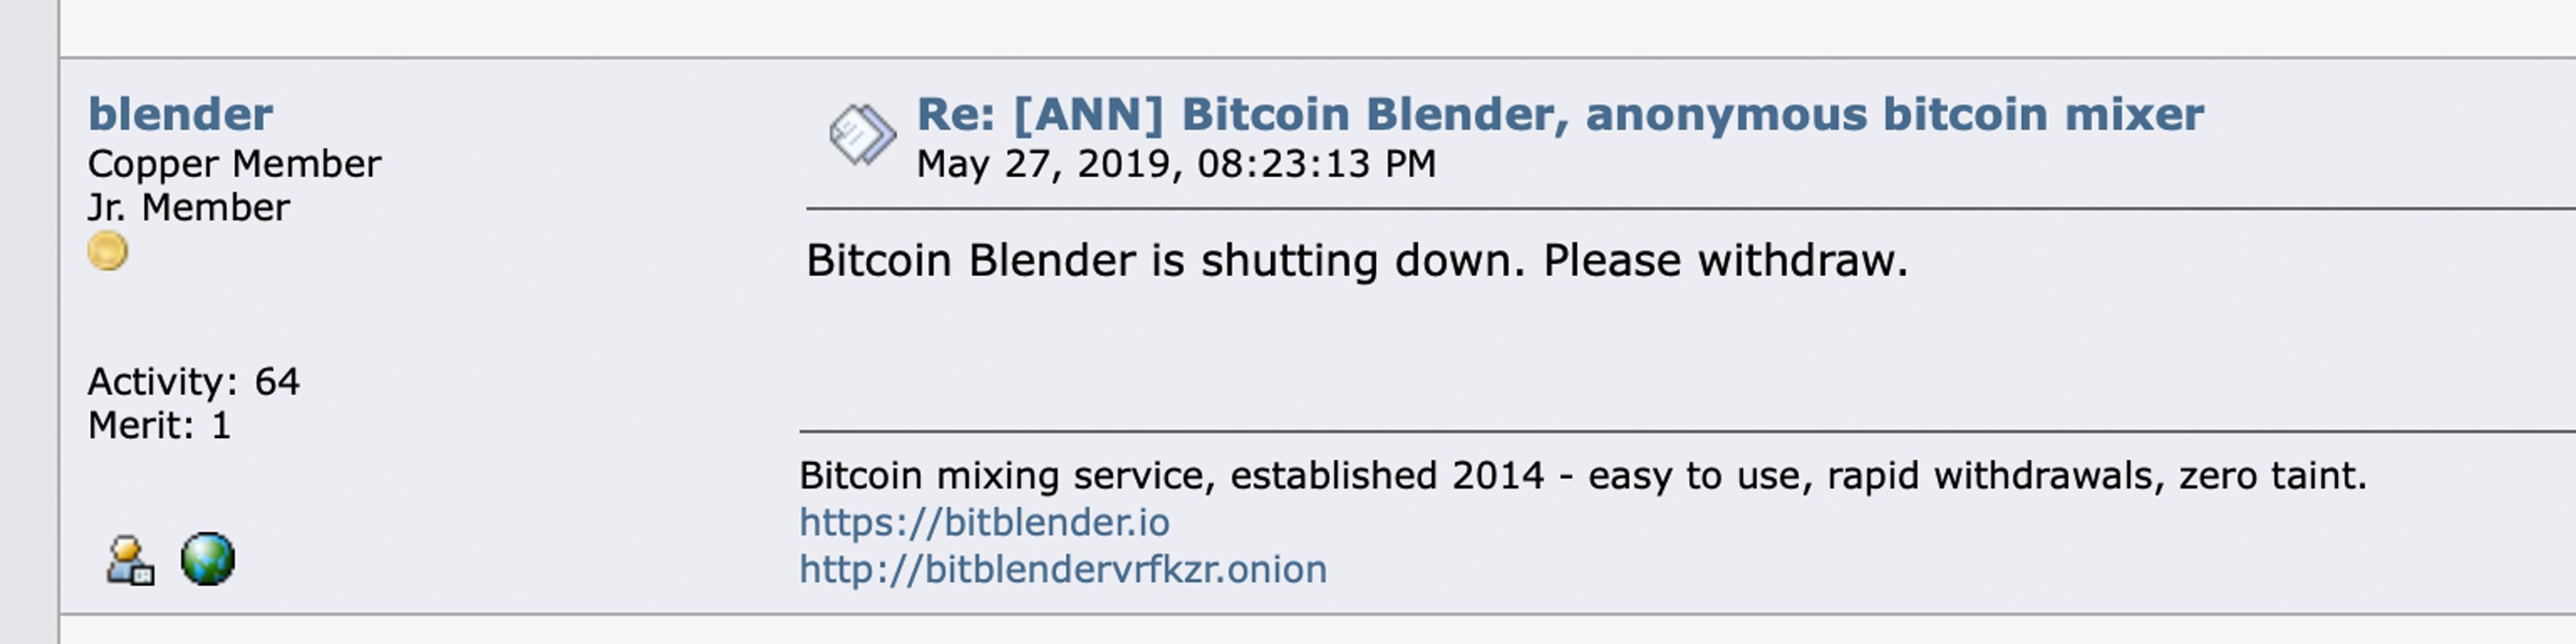 Mixing Service Bitcoin Blender Quits After Bestmixer Takedown